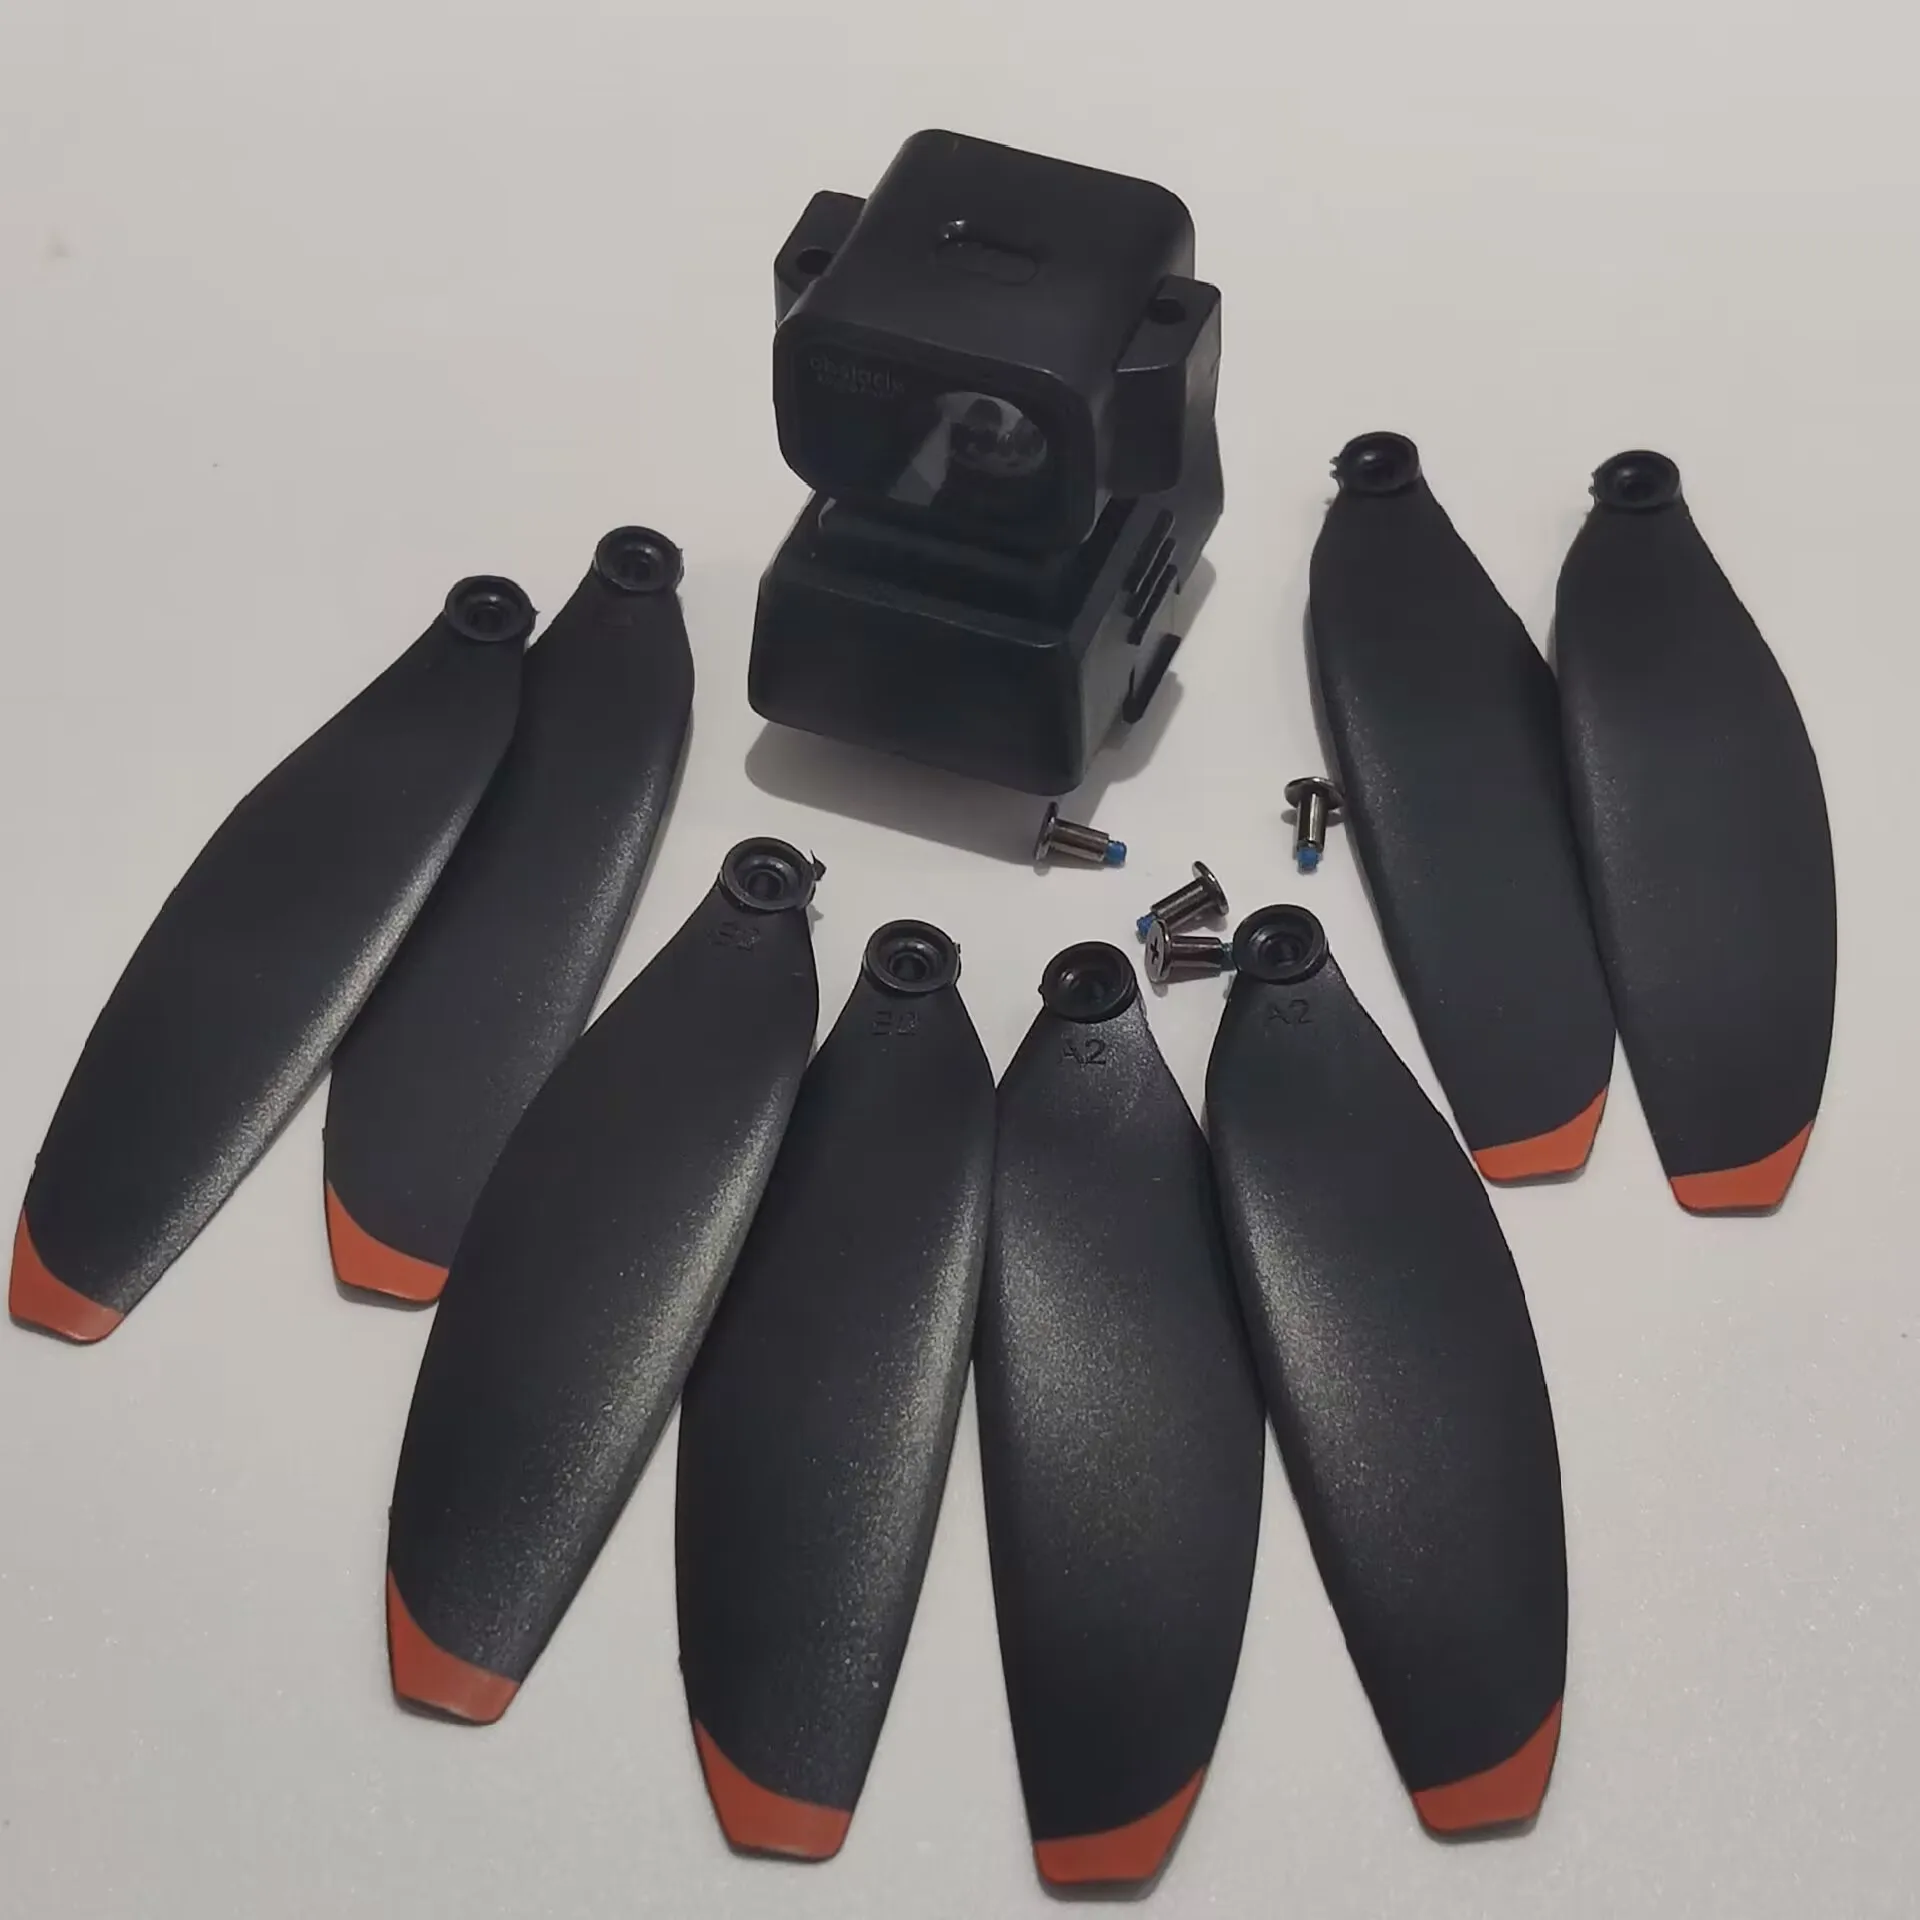 

LYZRC L600MAX/L600PRO Brushless Motor Drone L600Pro Max Foldable RC Quadcopter Spare Parts CW CCW Propeller Obstacle Avoidance